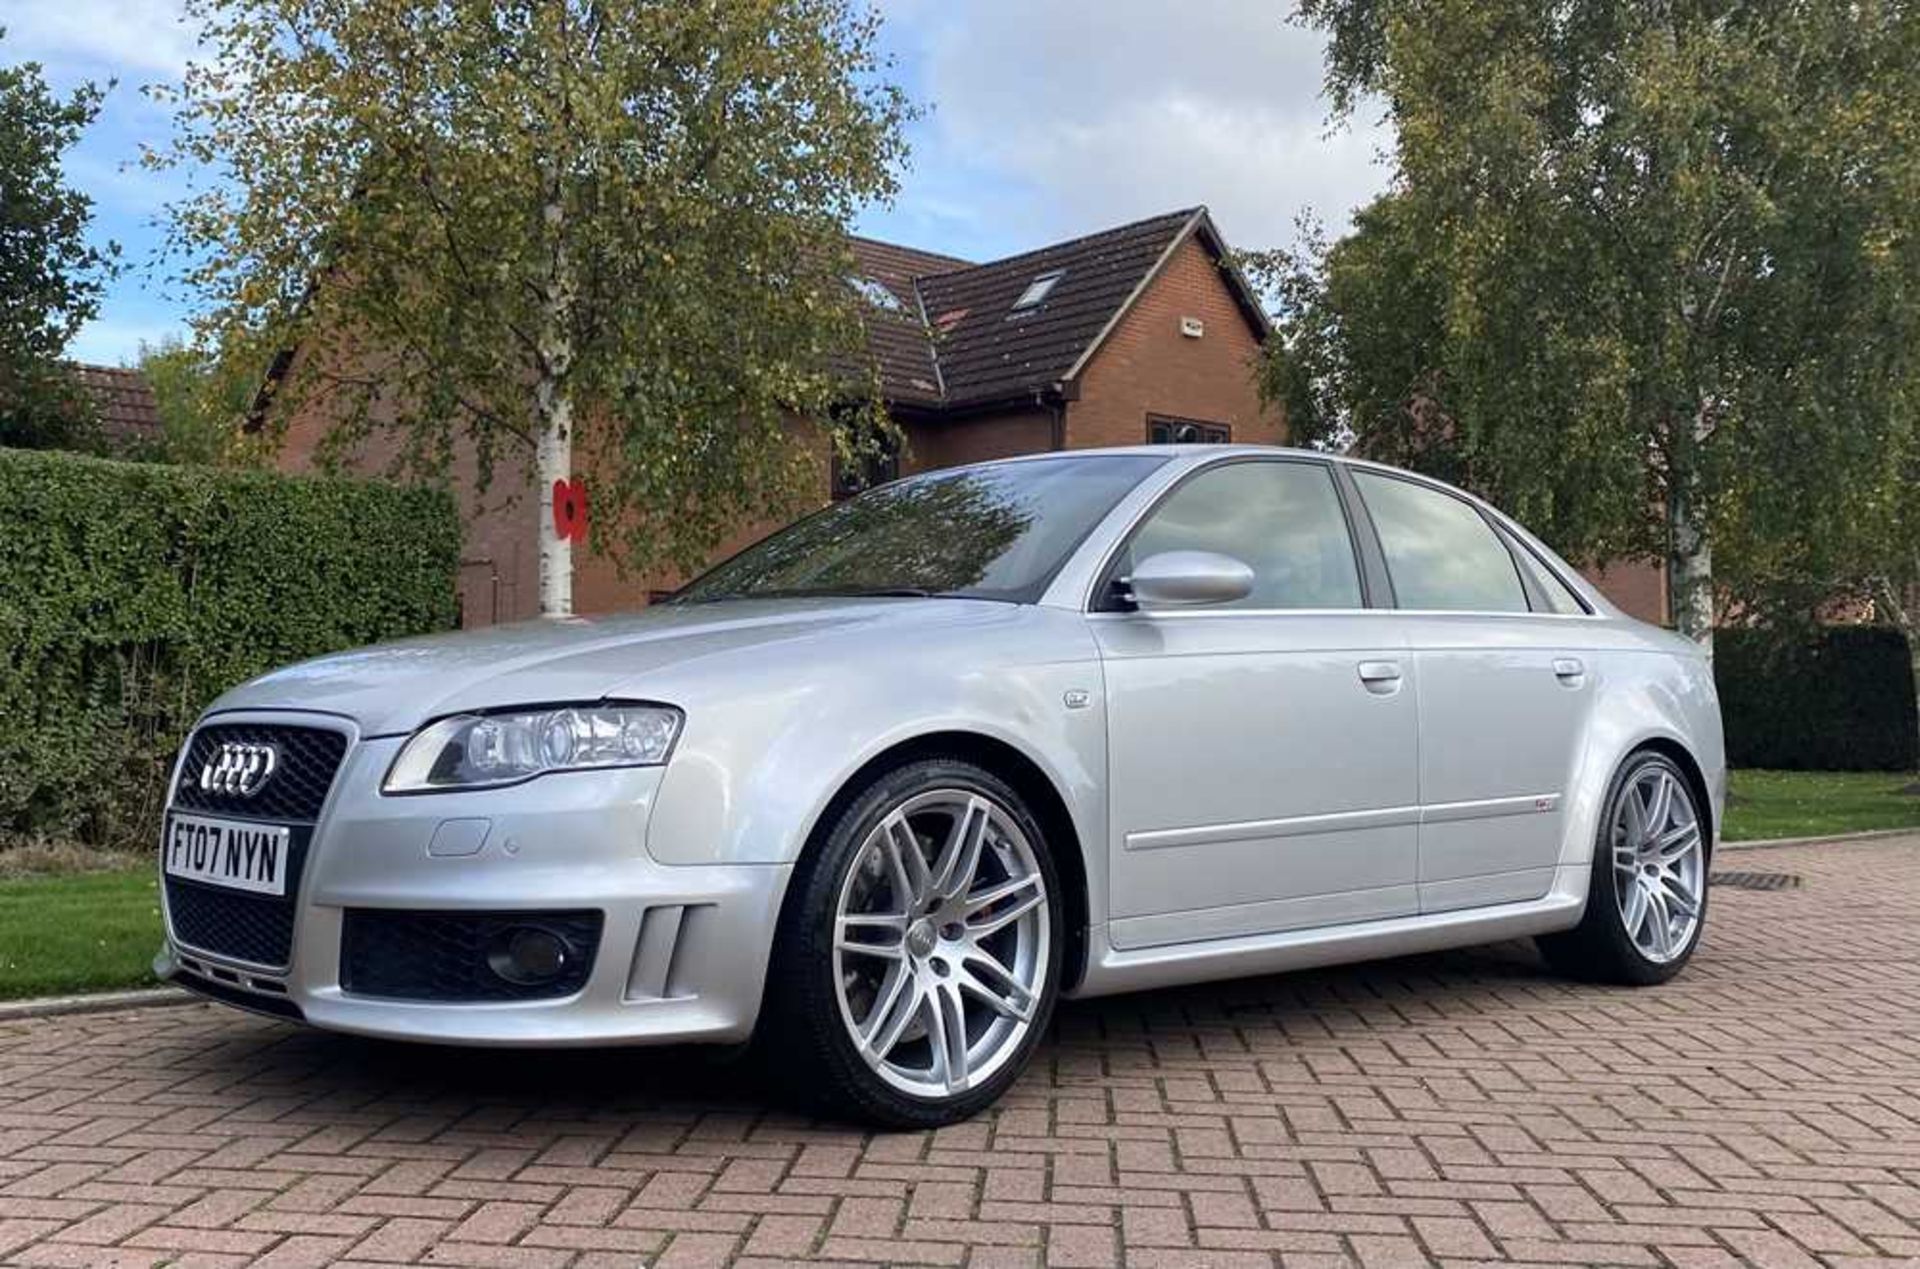 2007 Audi RS4 Saloon One owner and just c.60,000 miles from new - Image 7 of 86